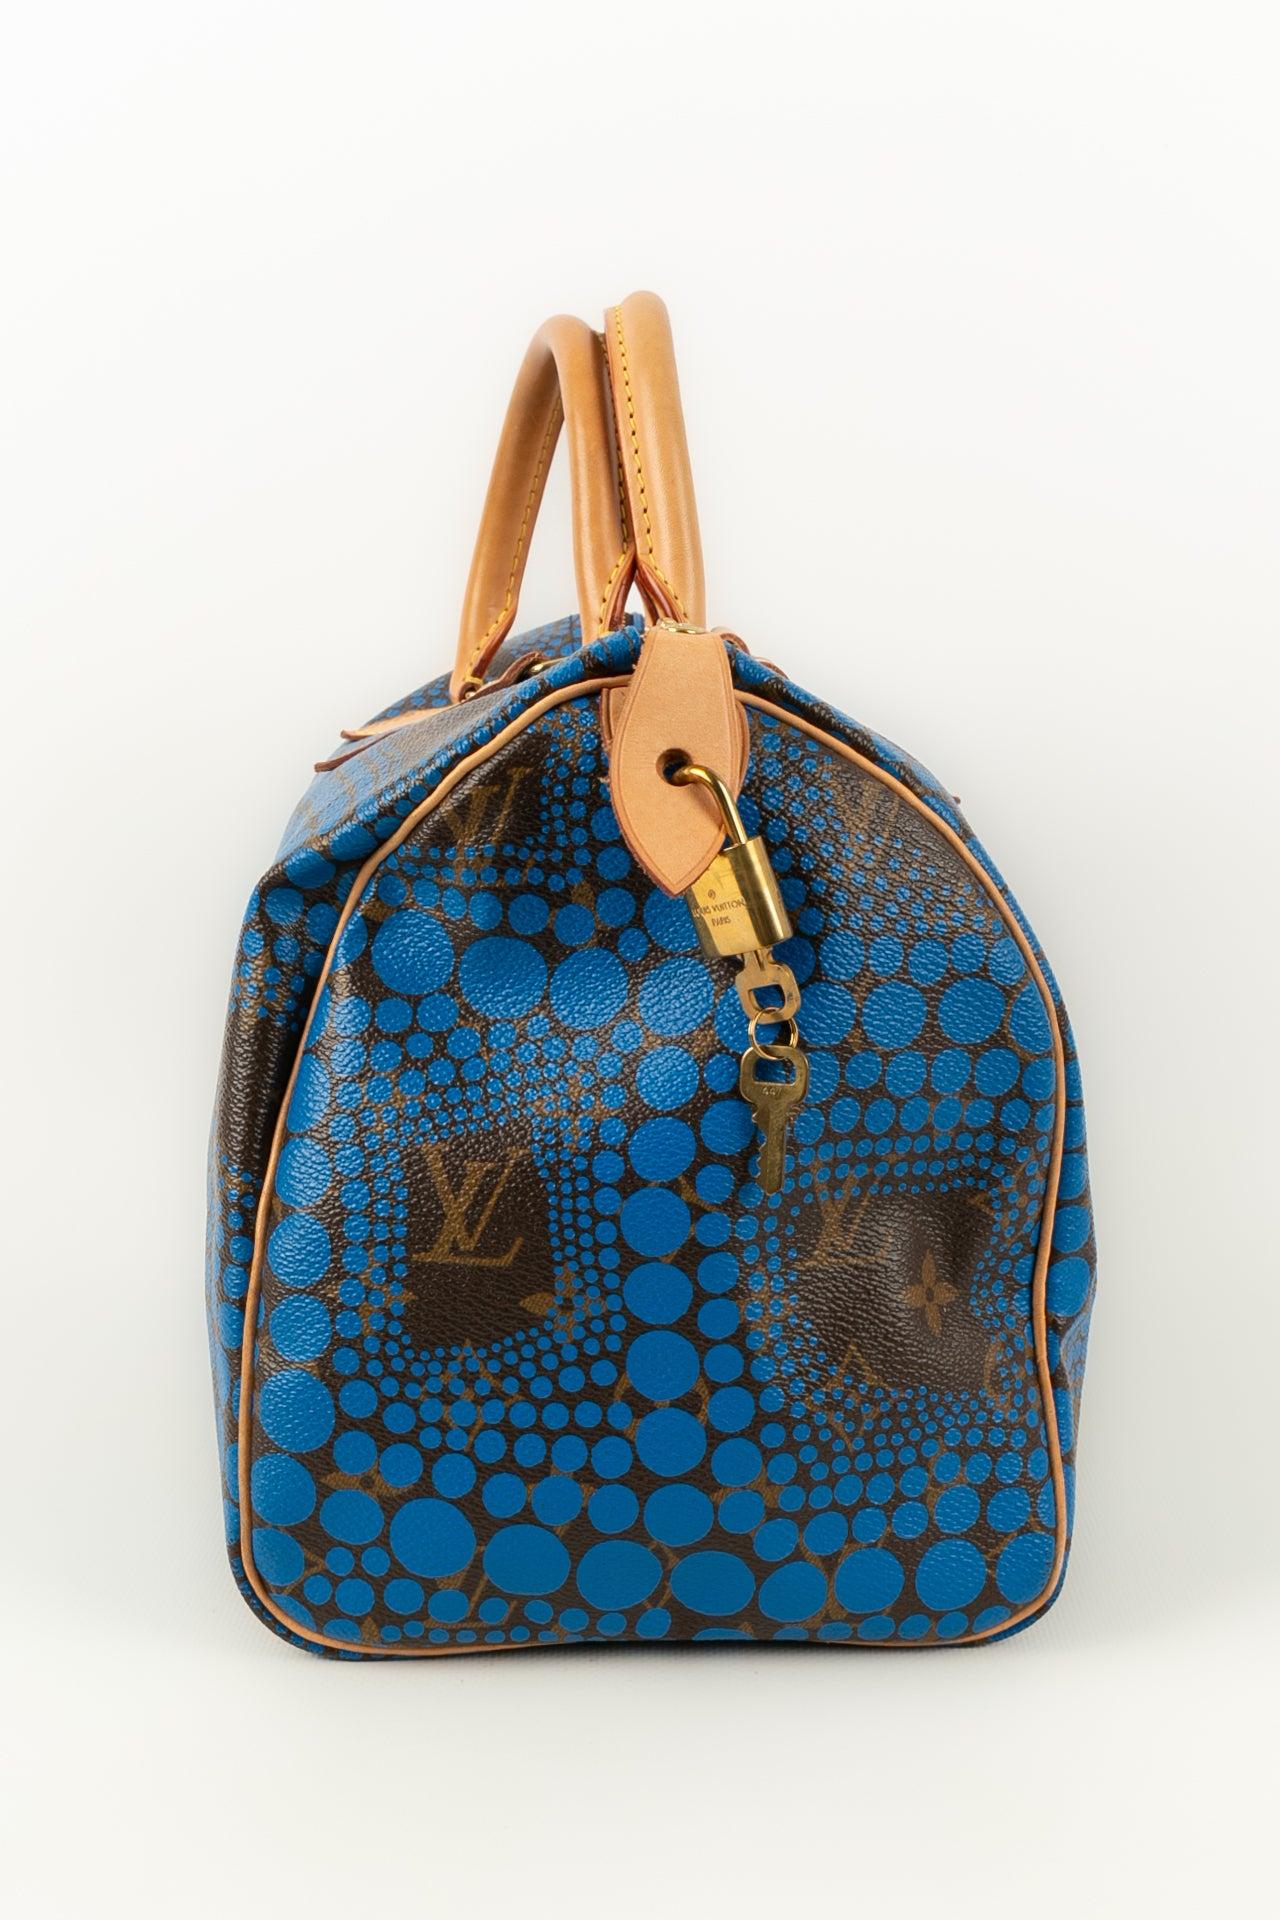 Louis Vuitton - (Made in France) Monogram leather bag designed by the artist Yayoi Kusama. Circa 2012's.

Additional information: 
Dimensions: Height: 26 cm, Length: 30 cm, Depth: 17 cm, Handle: 28 cm
Condition: Very good condition
Seller Ref